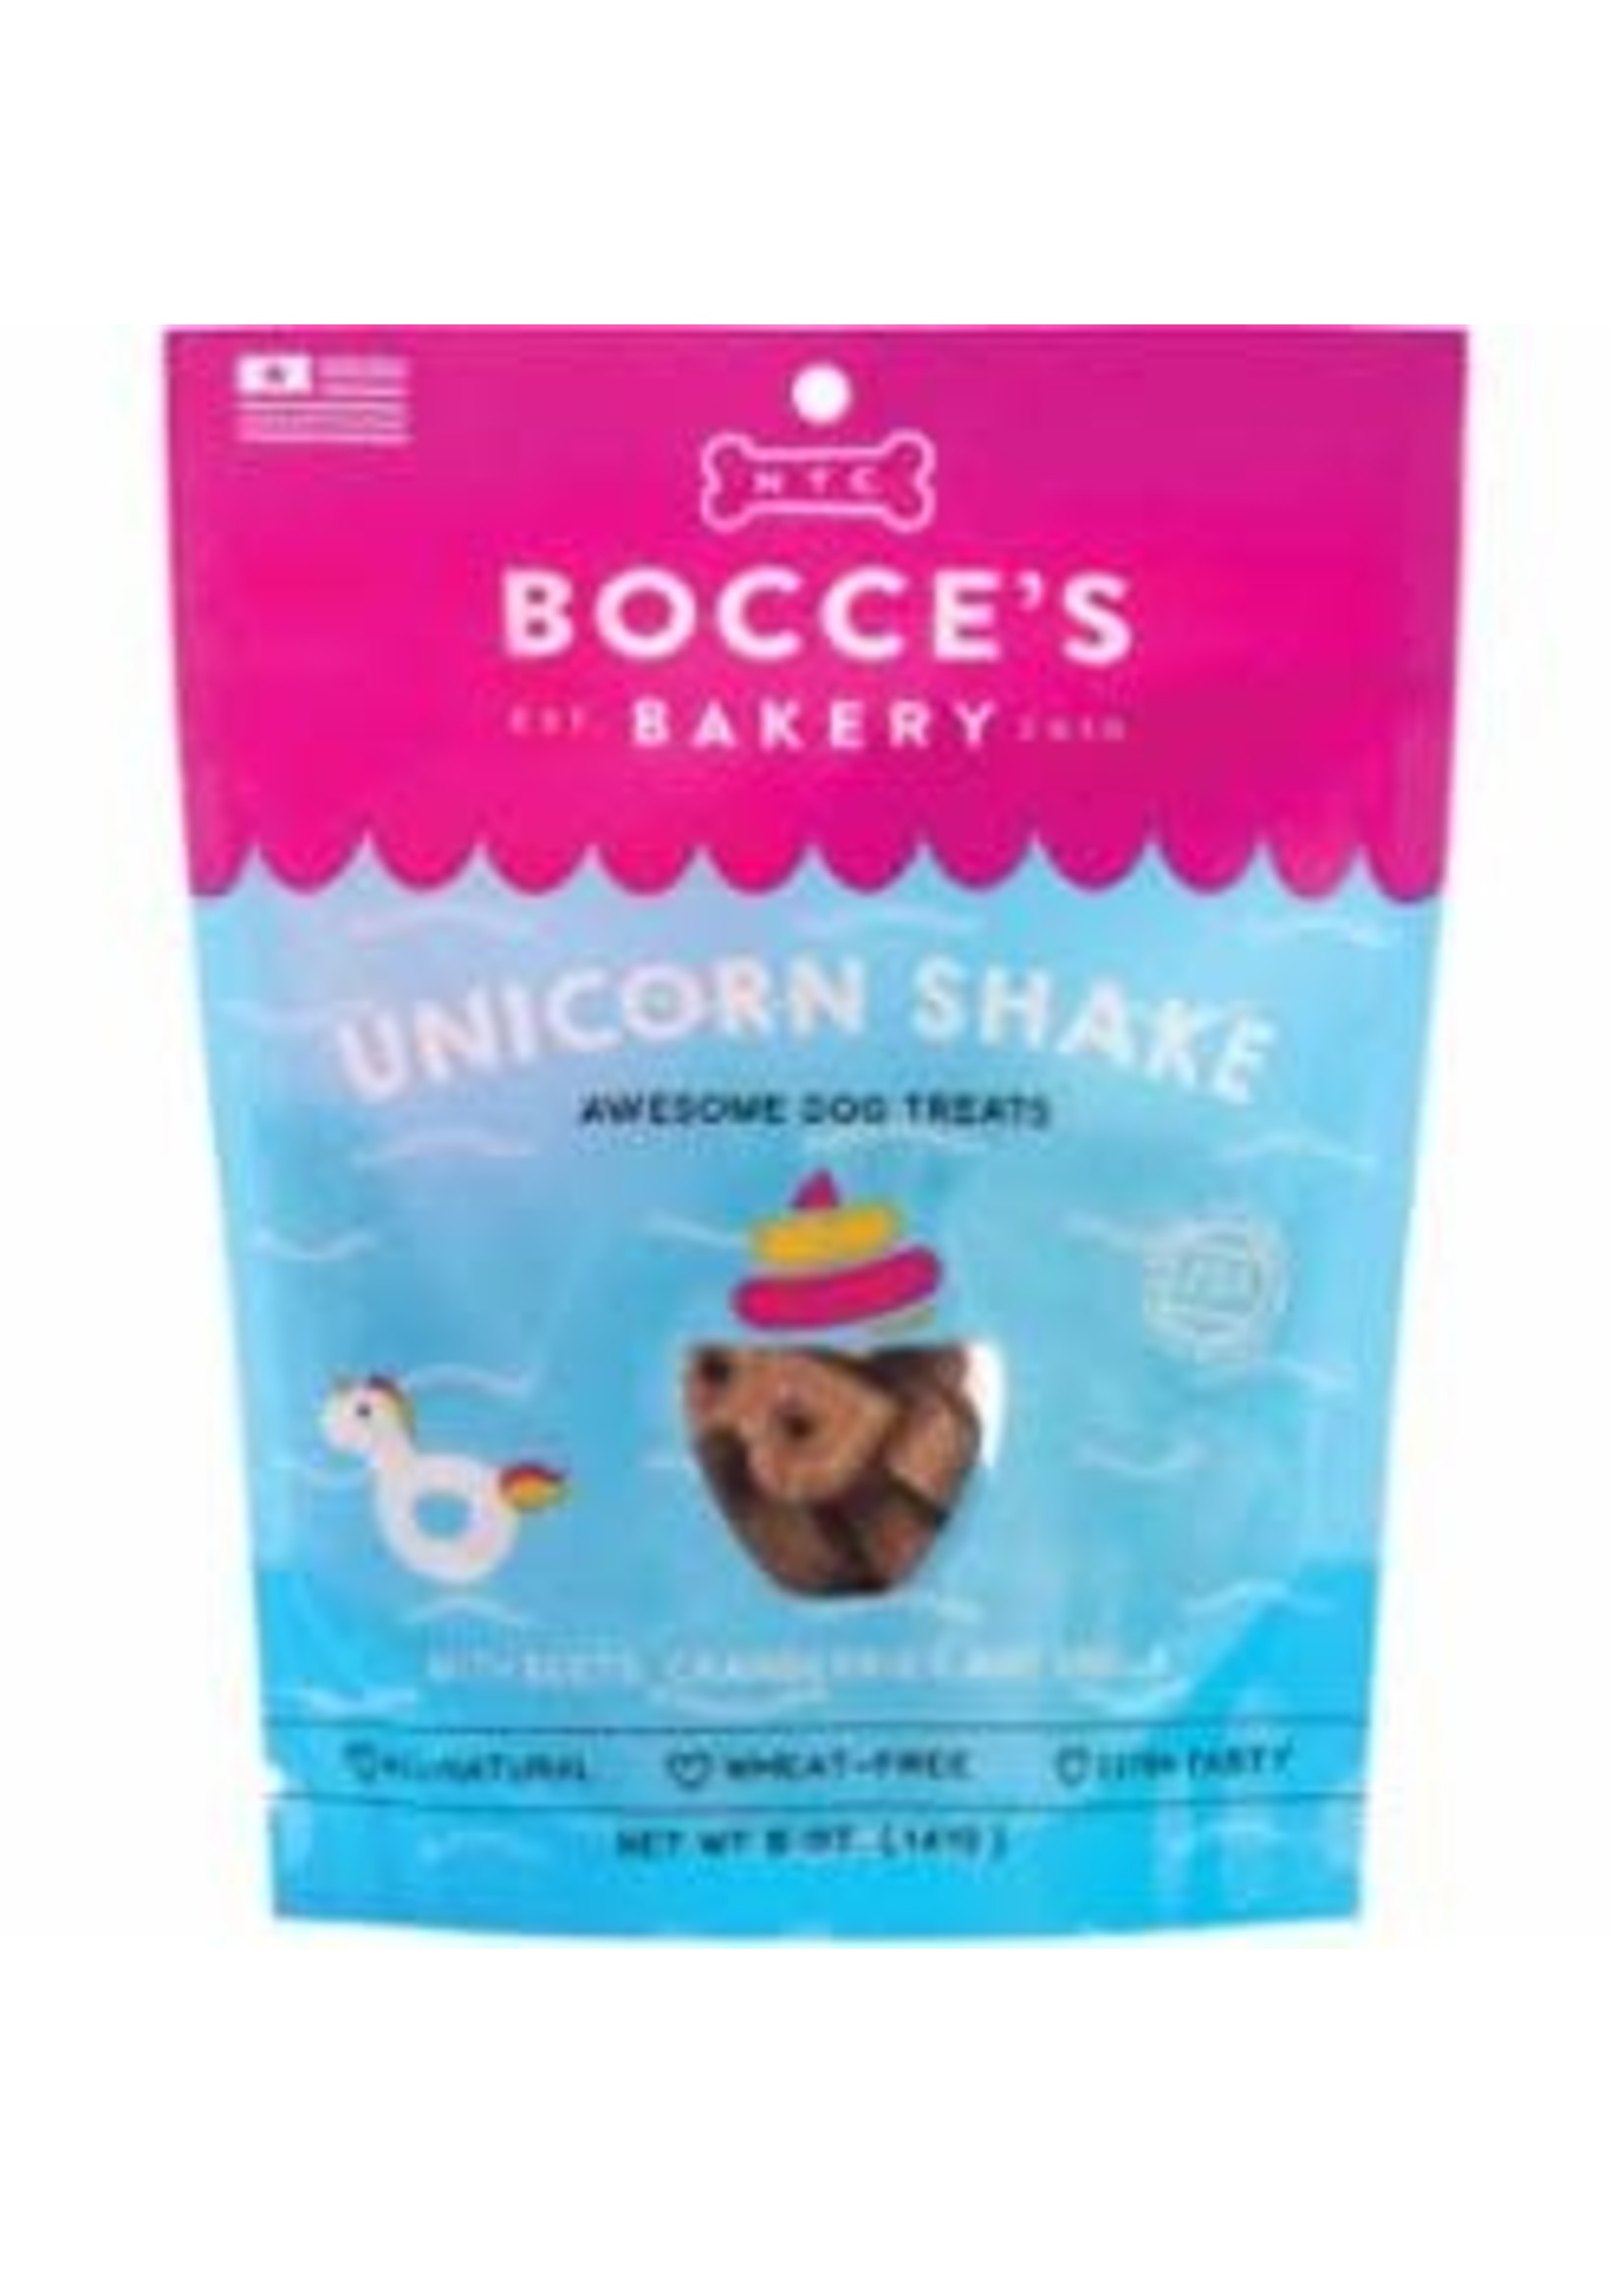 Bocce's Bakery UNICORN SHAKE BISCUITS 5OZ